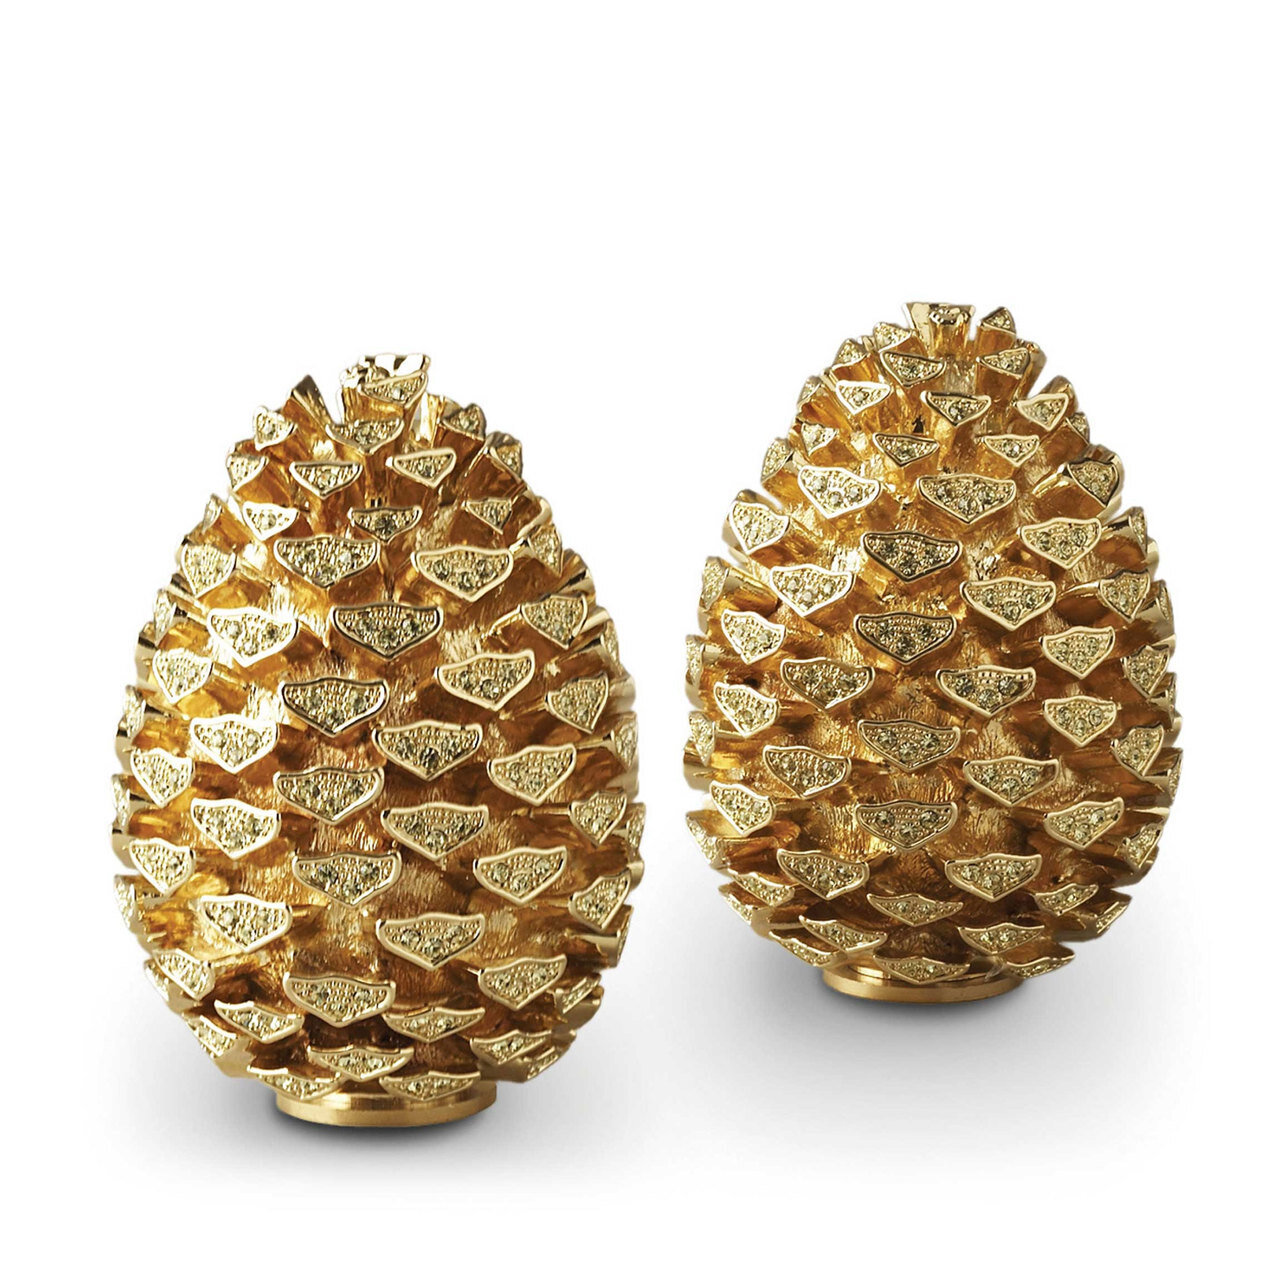 L'Objet Gold with Yellow Crystals Salt and Pepper Shaker Pinecone Spice Jewels